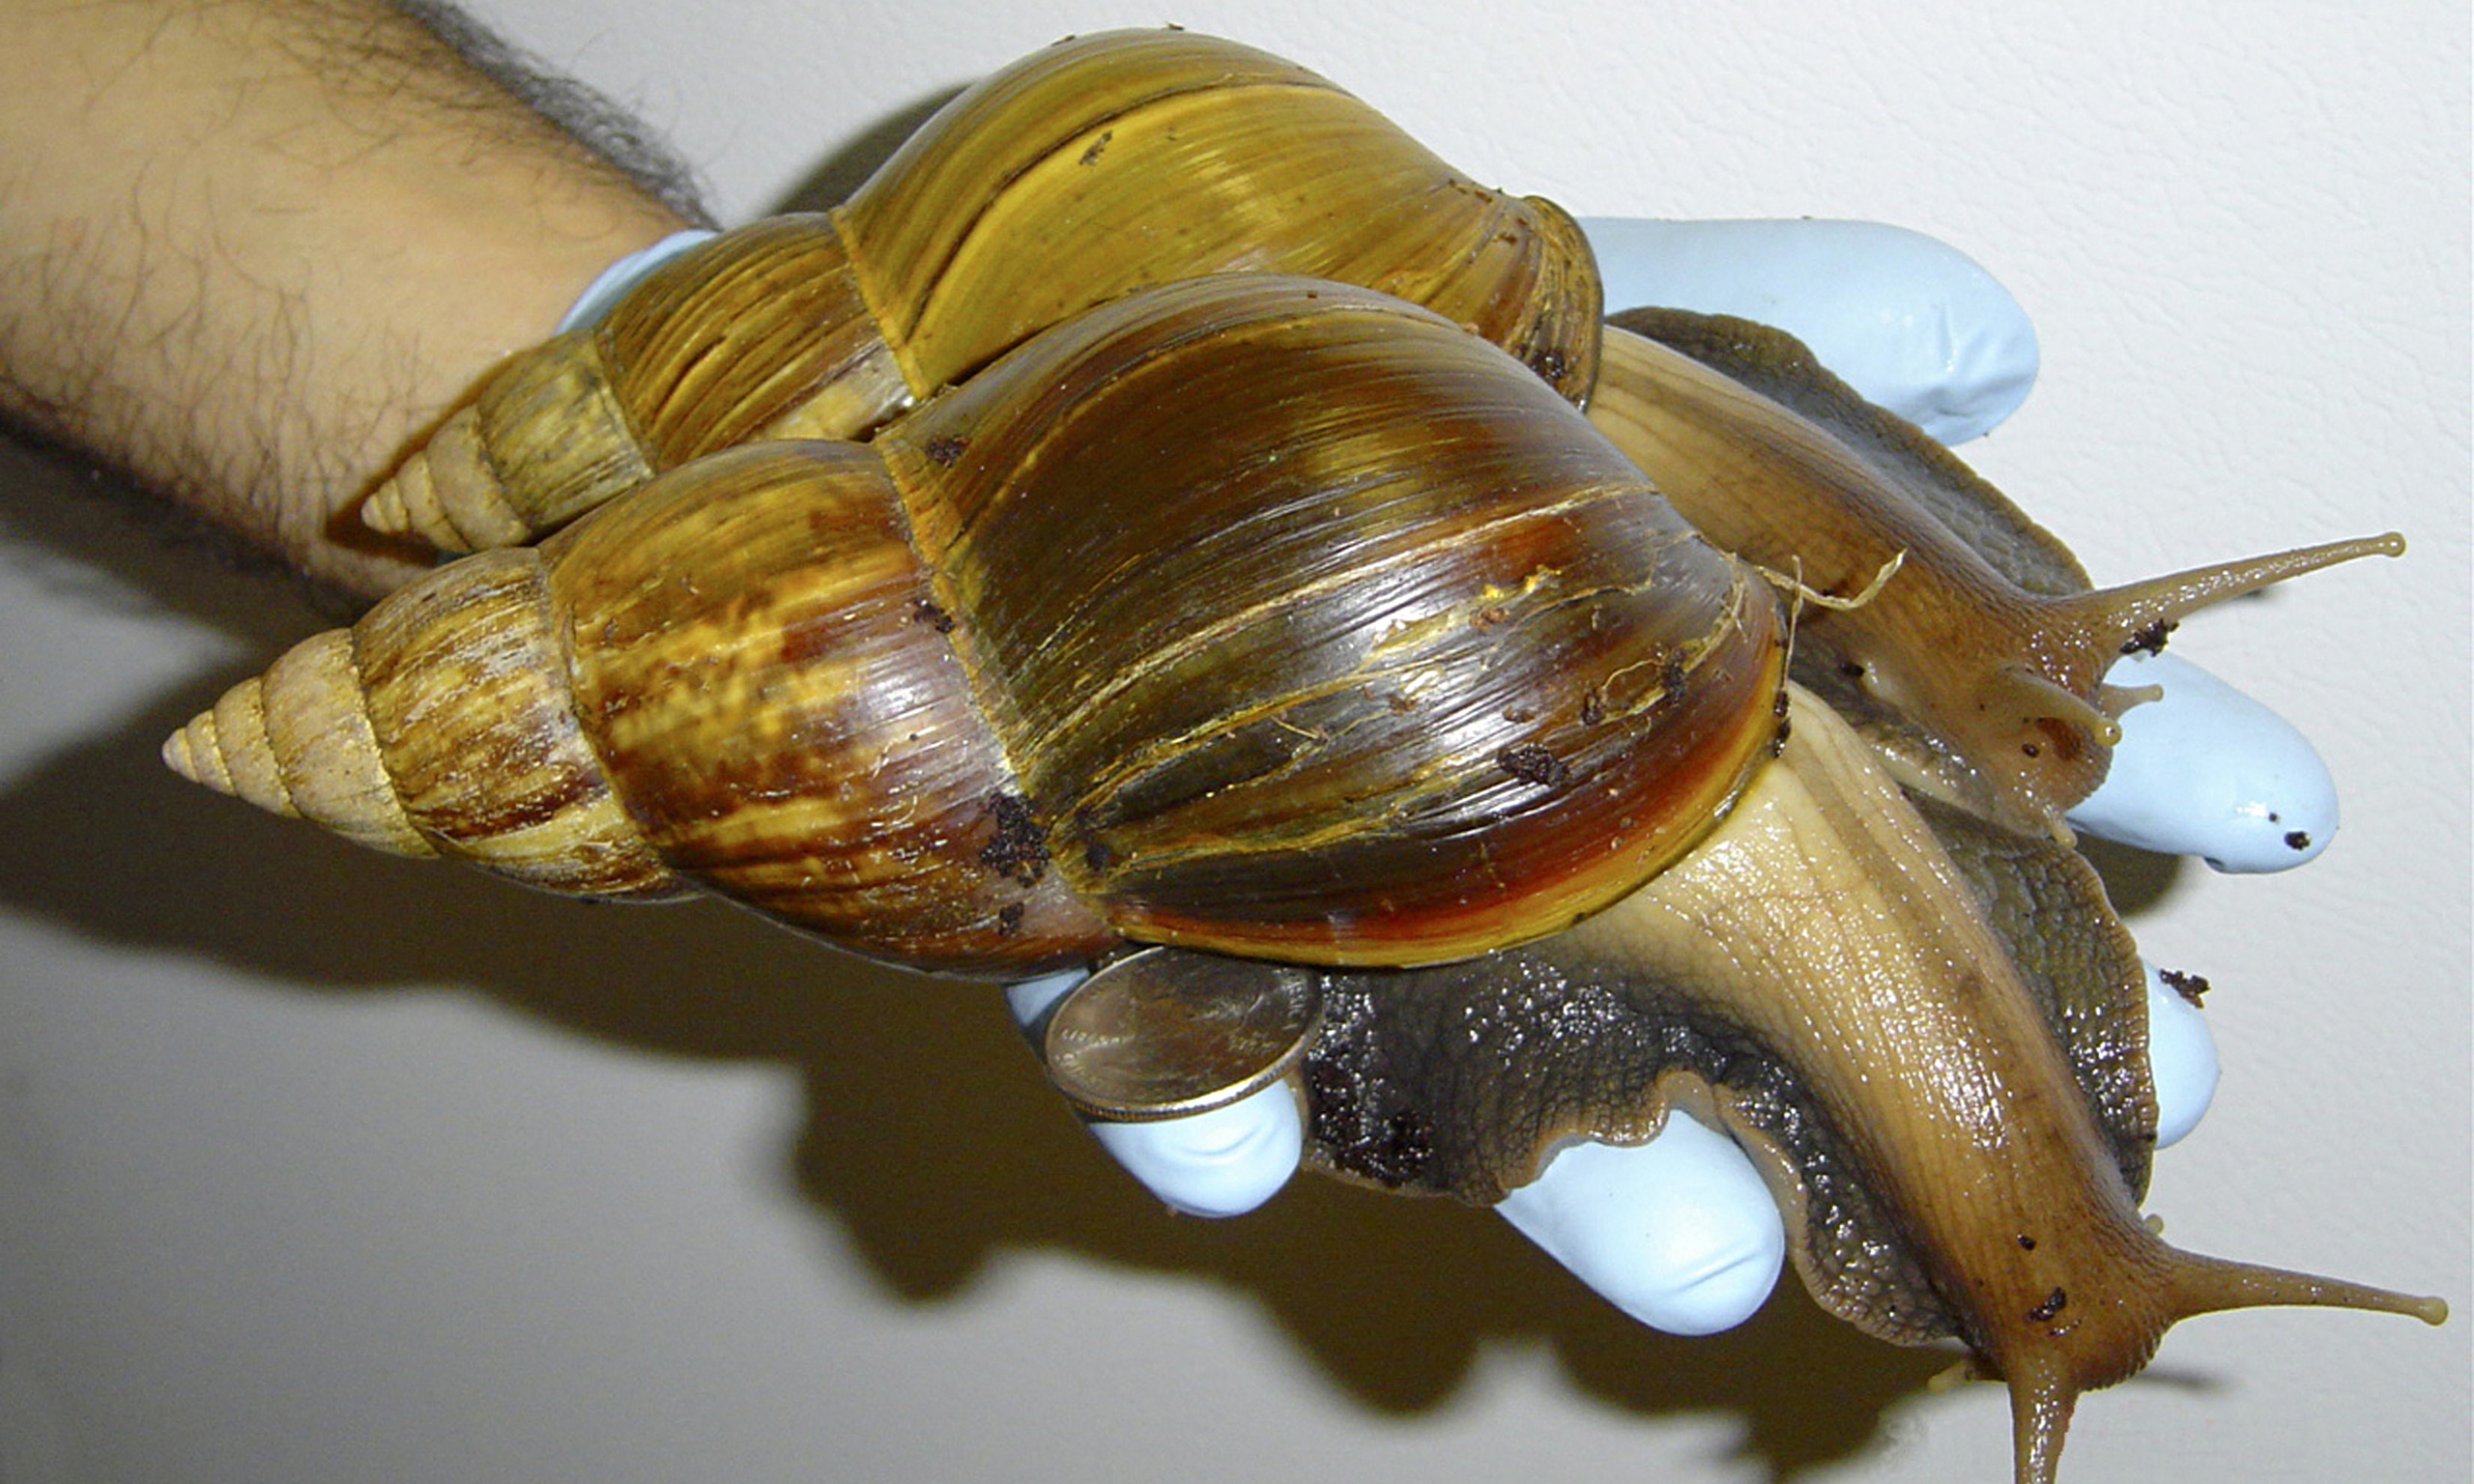 Hundreds Of Giant African Snails Seized In Us Environment The Guardian 